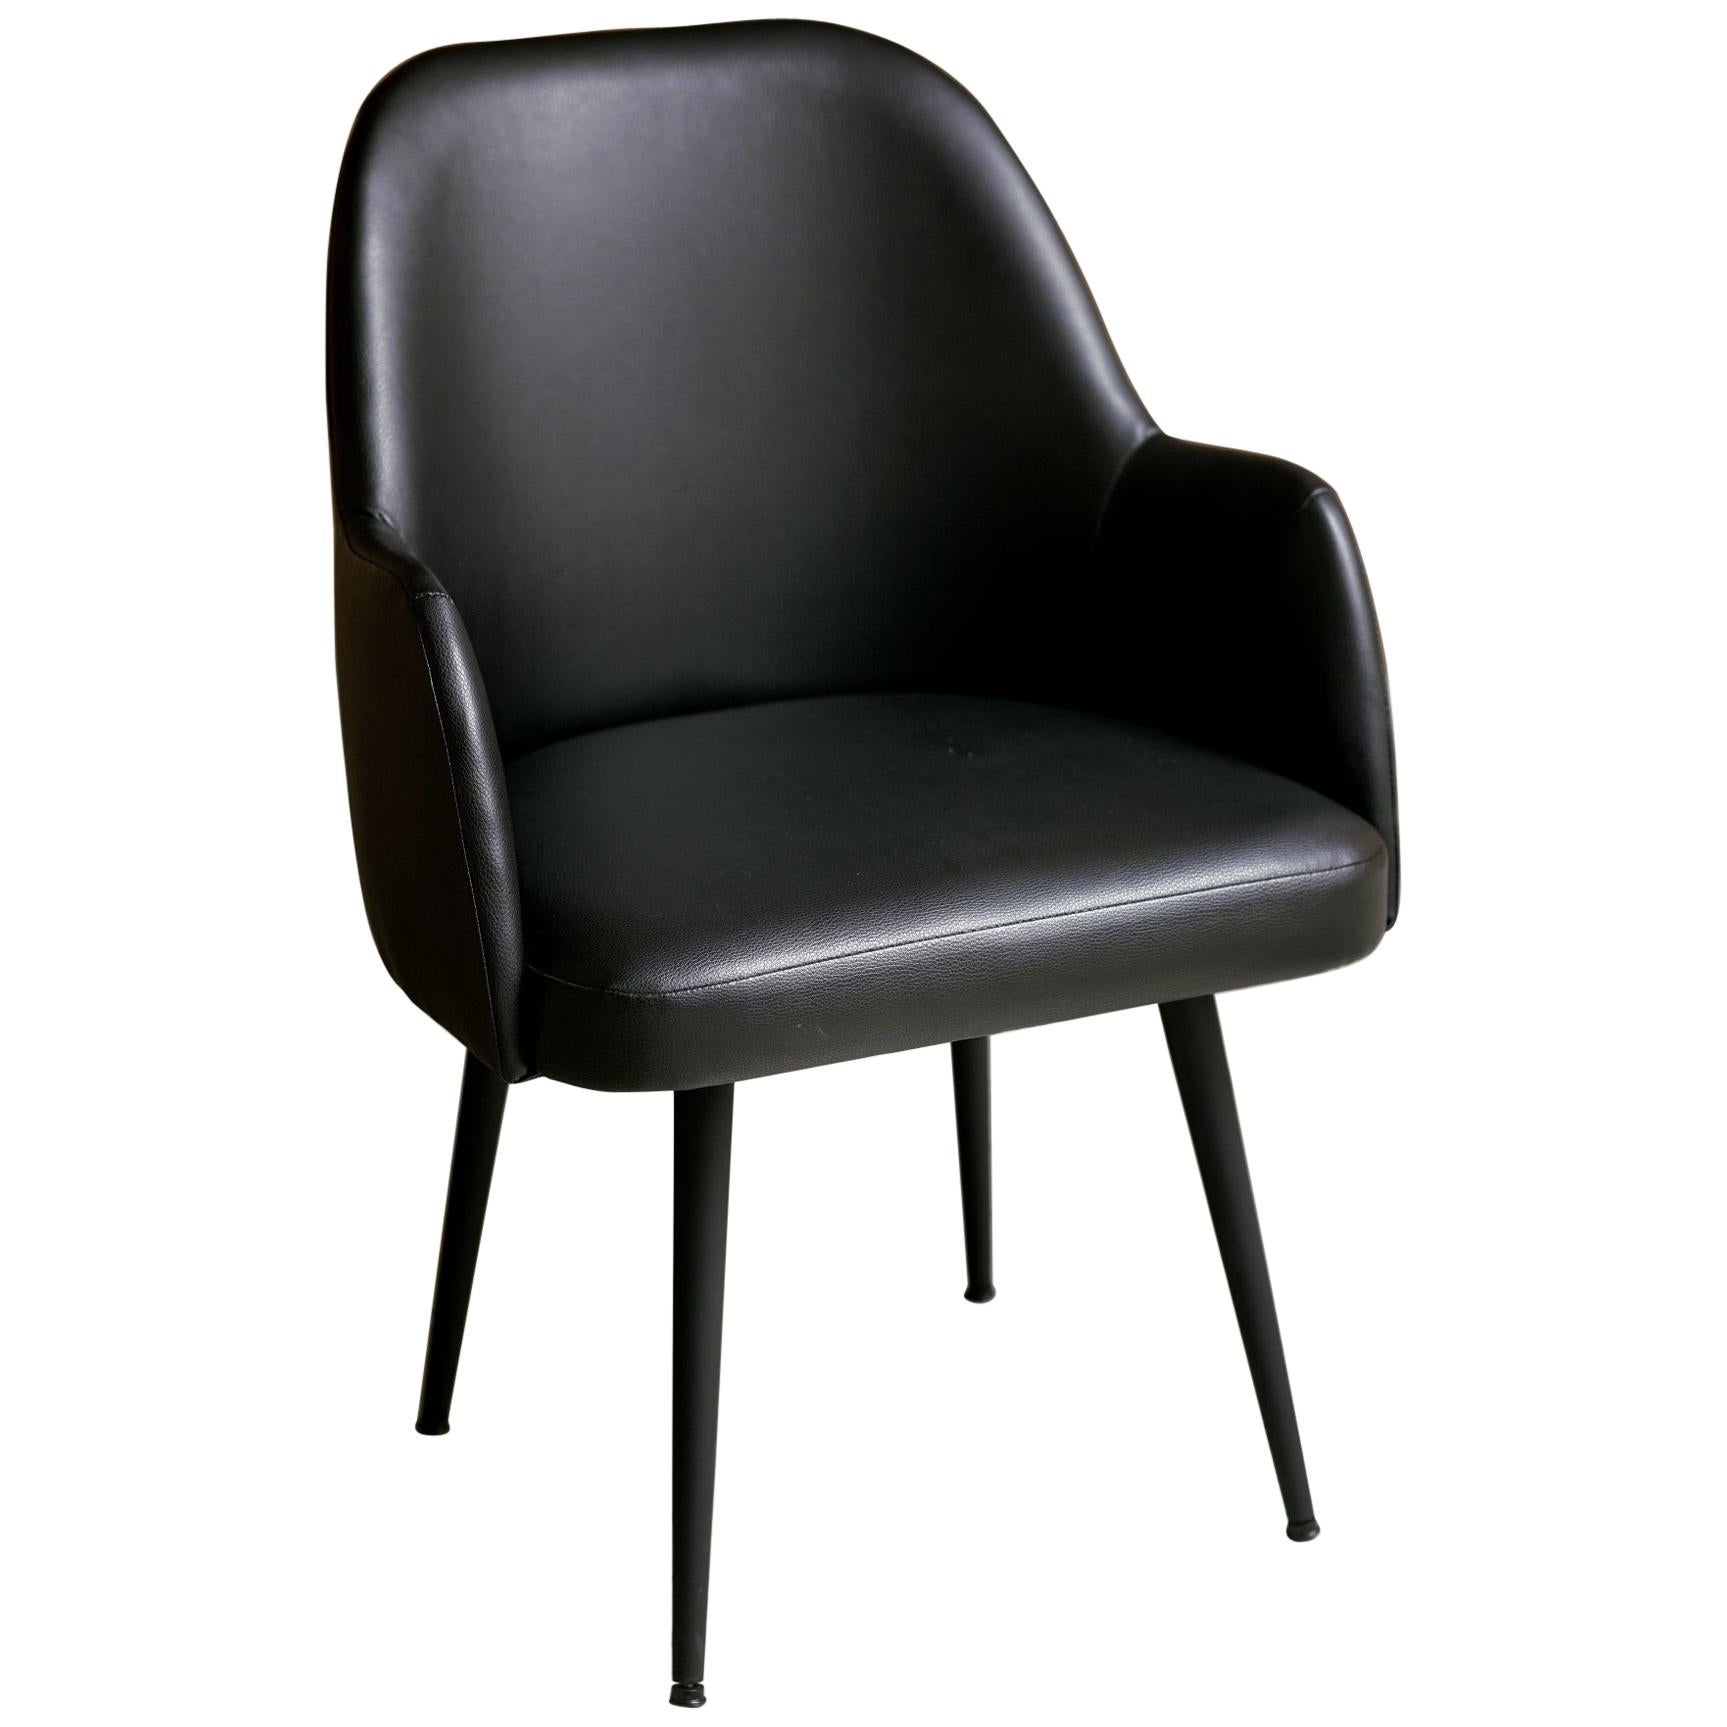 Modern Obsidian Black Faux Leather Fabric Dining Armchair with Steel Base Black